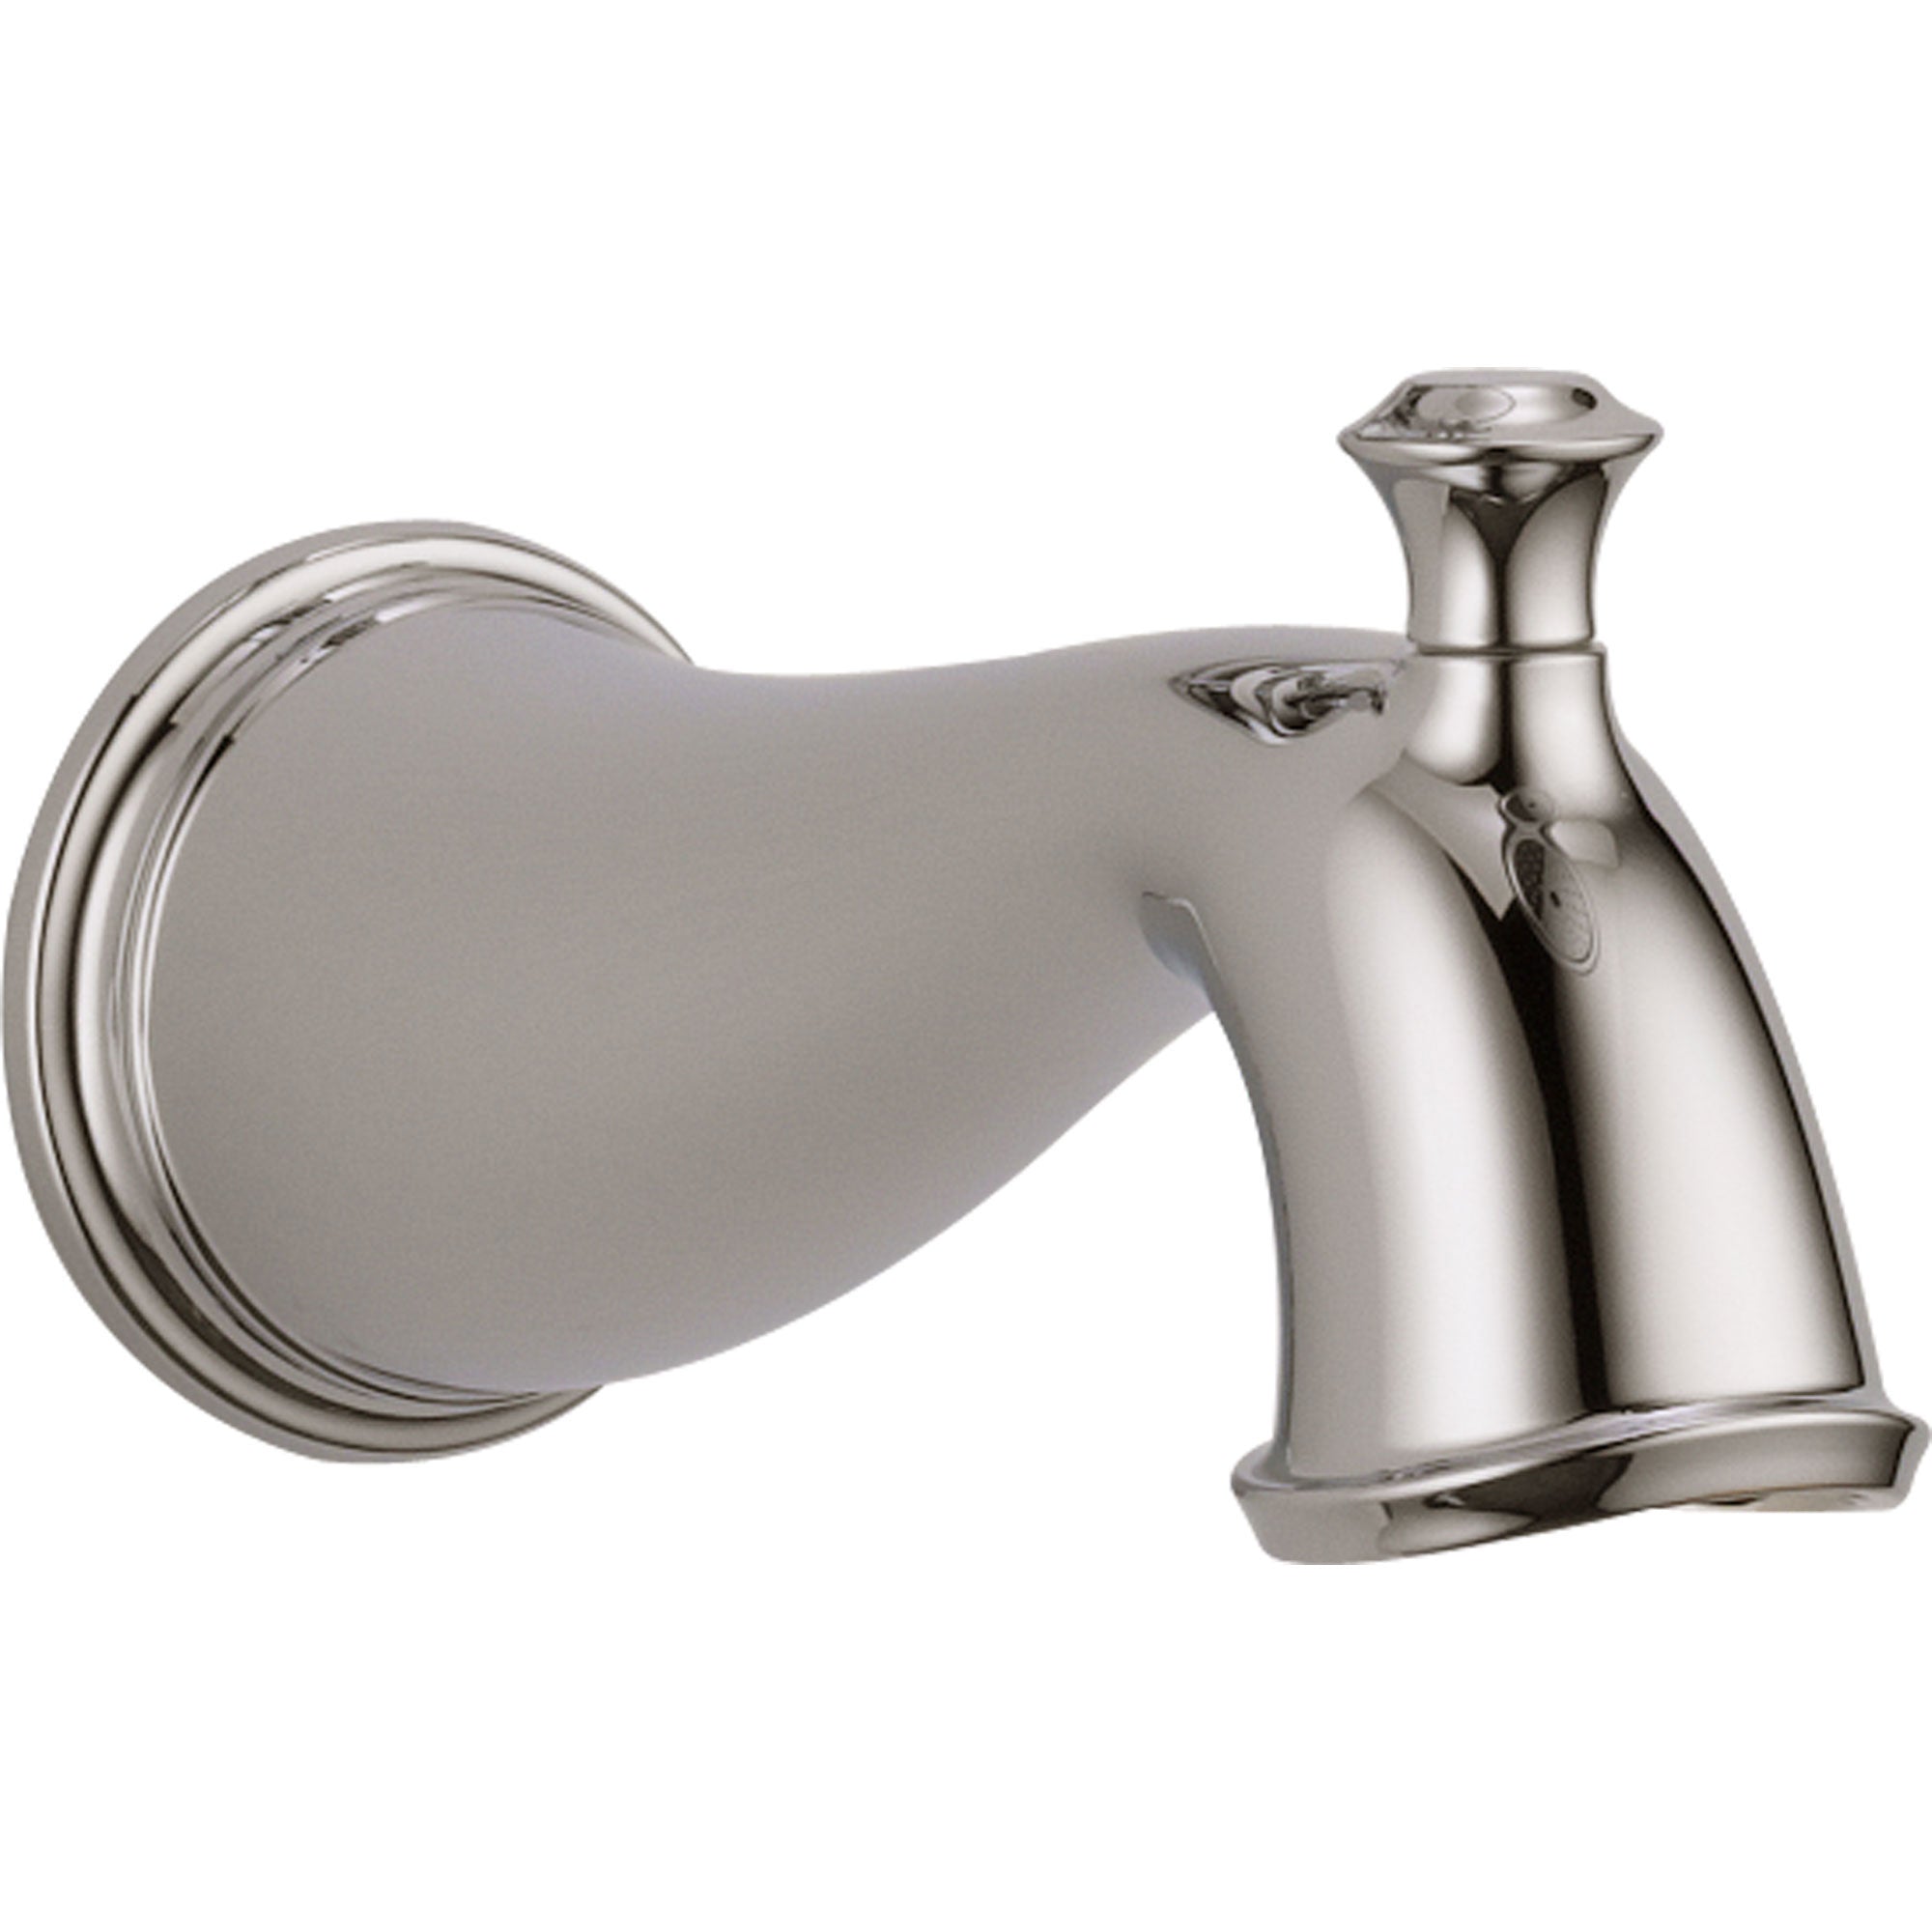 Delta Cassidy Polished Nickel Finish Pull-Up Diverter Tub Spout 582208